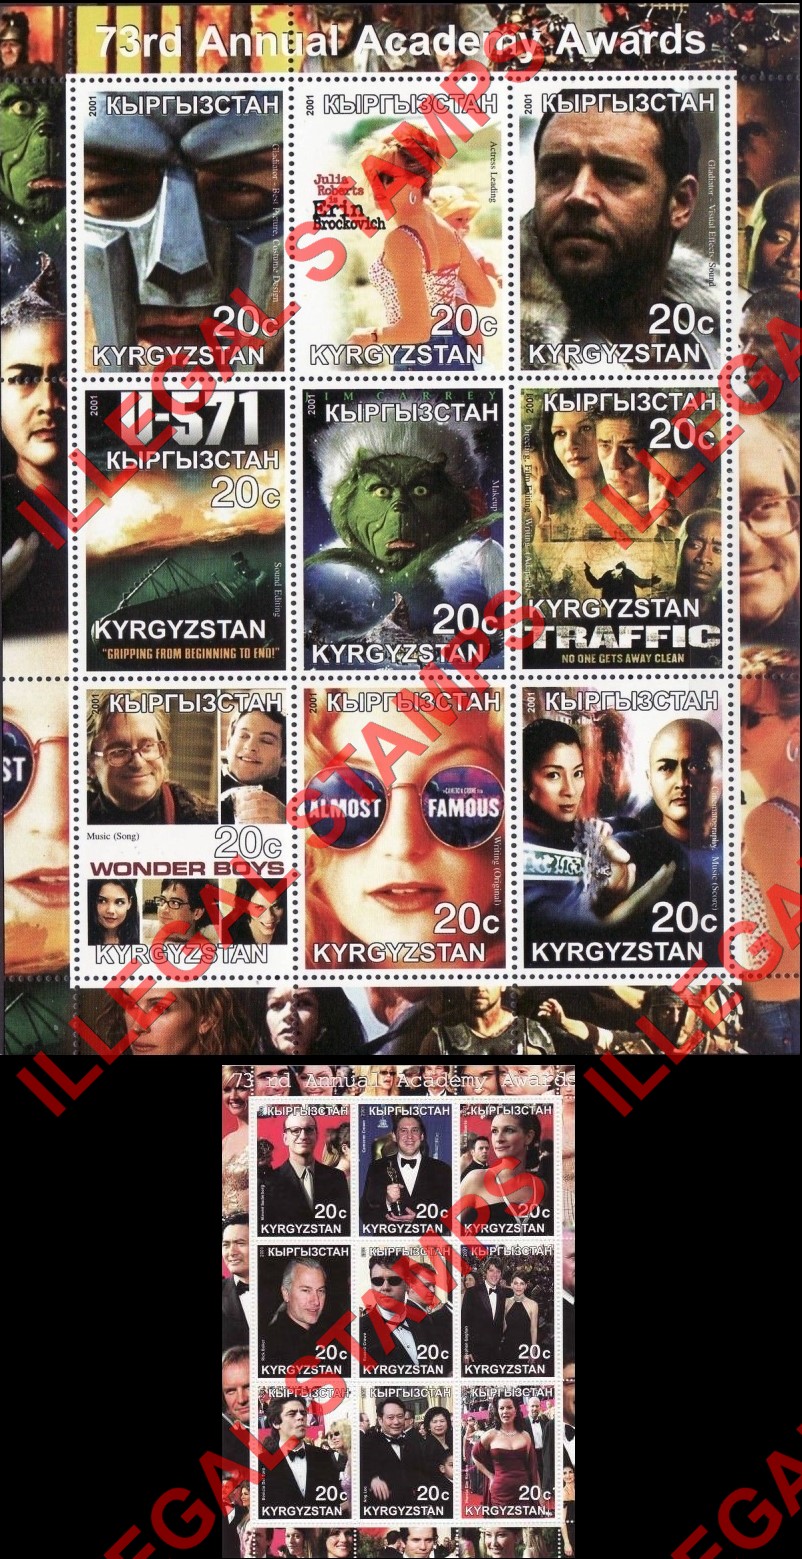 Kyrgyzstan 2001 73rd Academy Awards Illegal Stamp Sheetlets of Nine